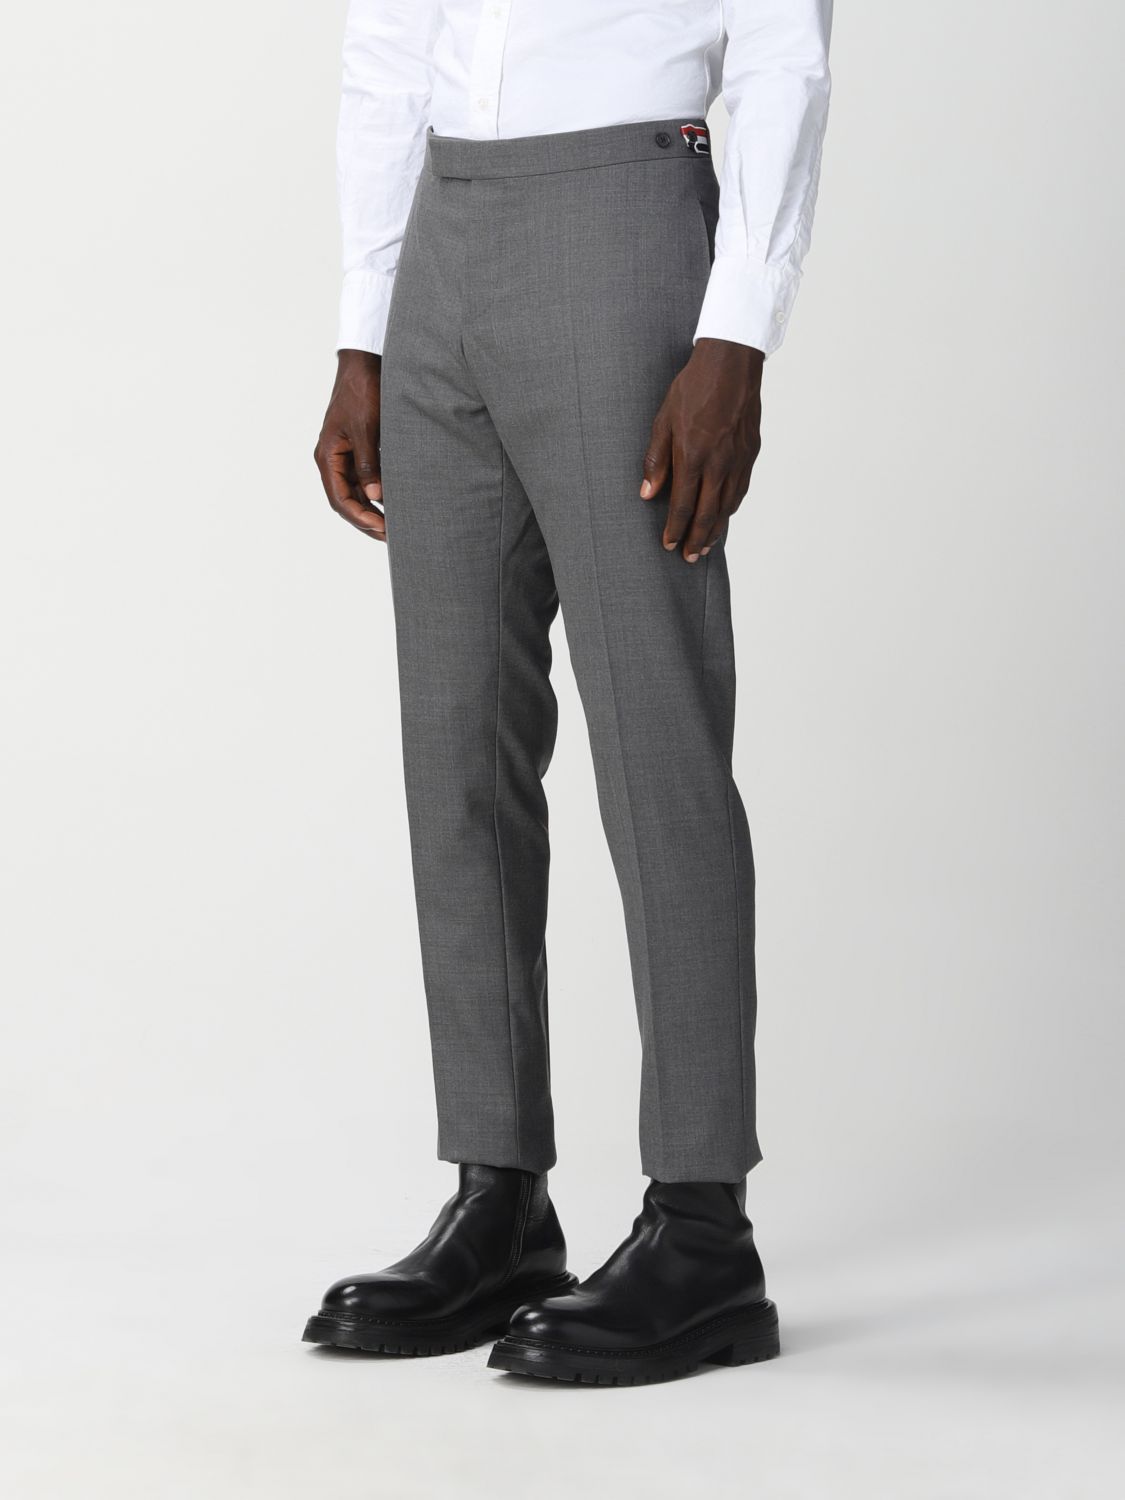 for Men Slacks and Chinos Formal trousers Mens Clothing Trousers Grey Thom Browne Wool Low Rise Skinny Side Tab Trouser In Super 120s Twill in Grey 